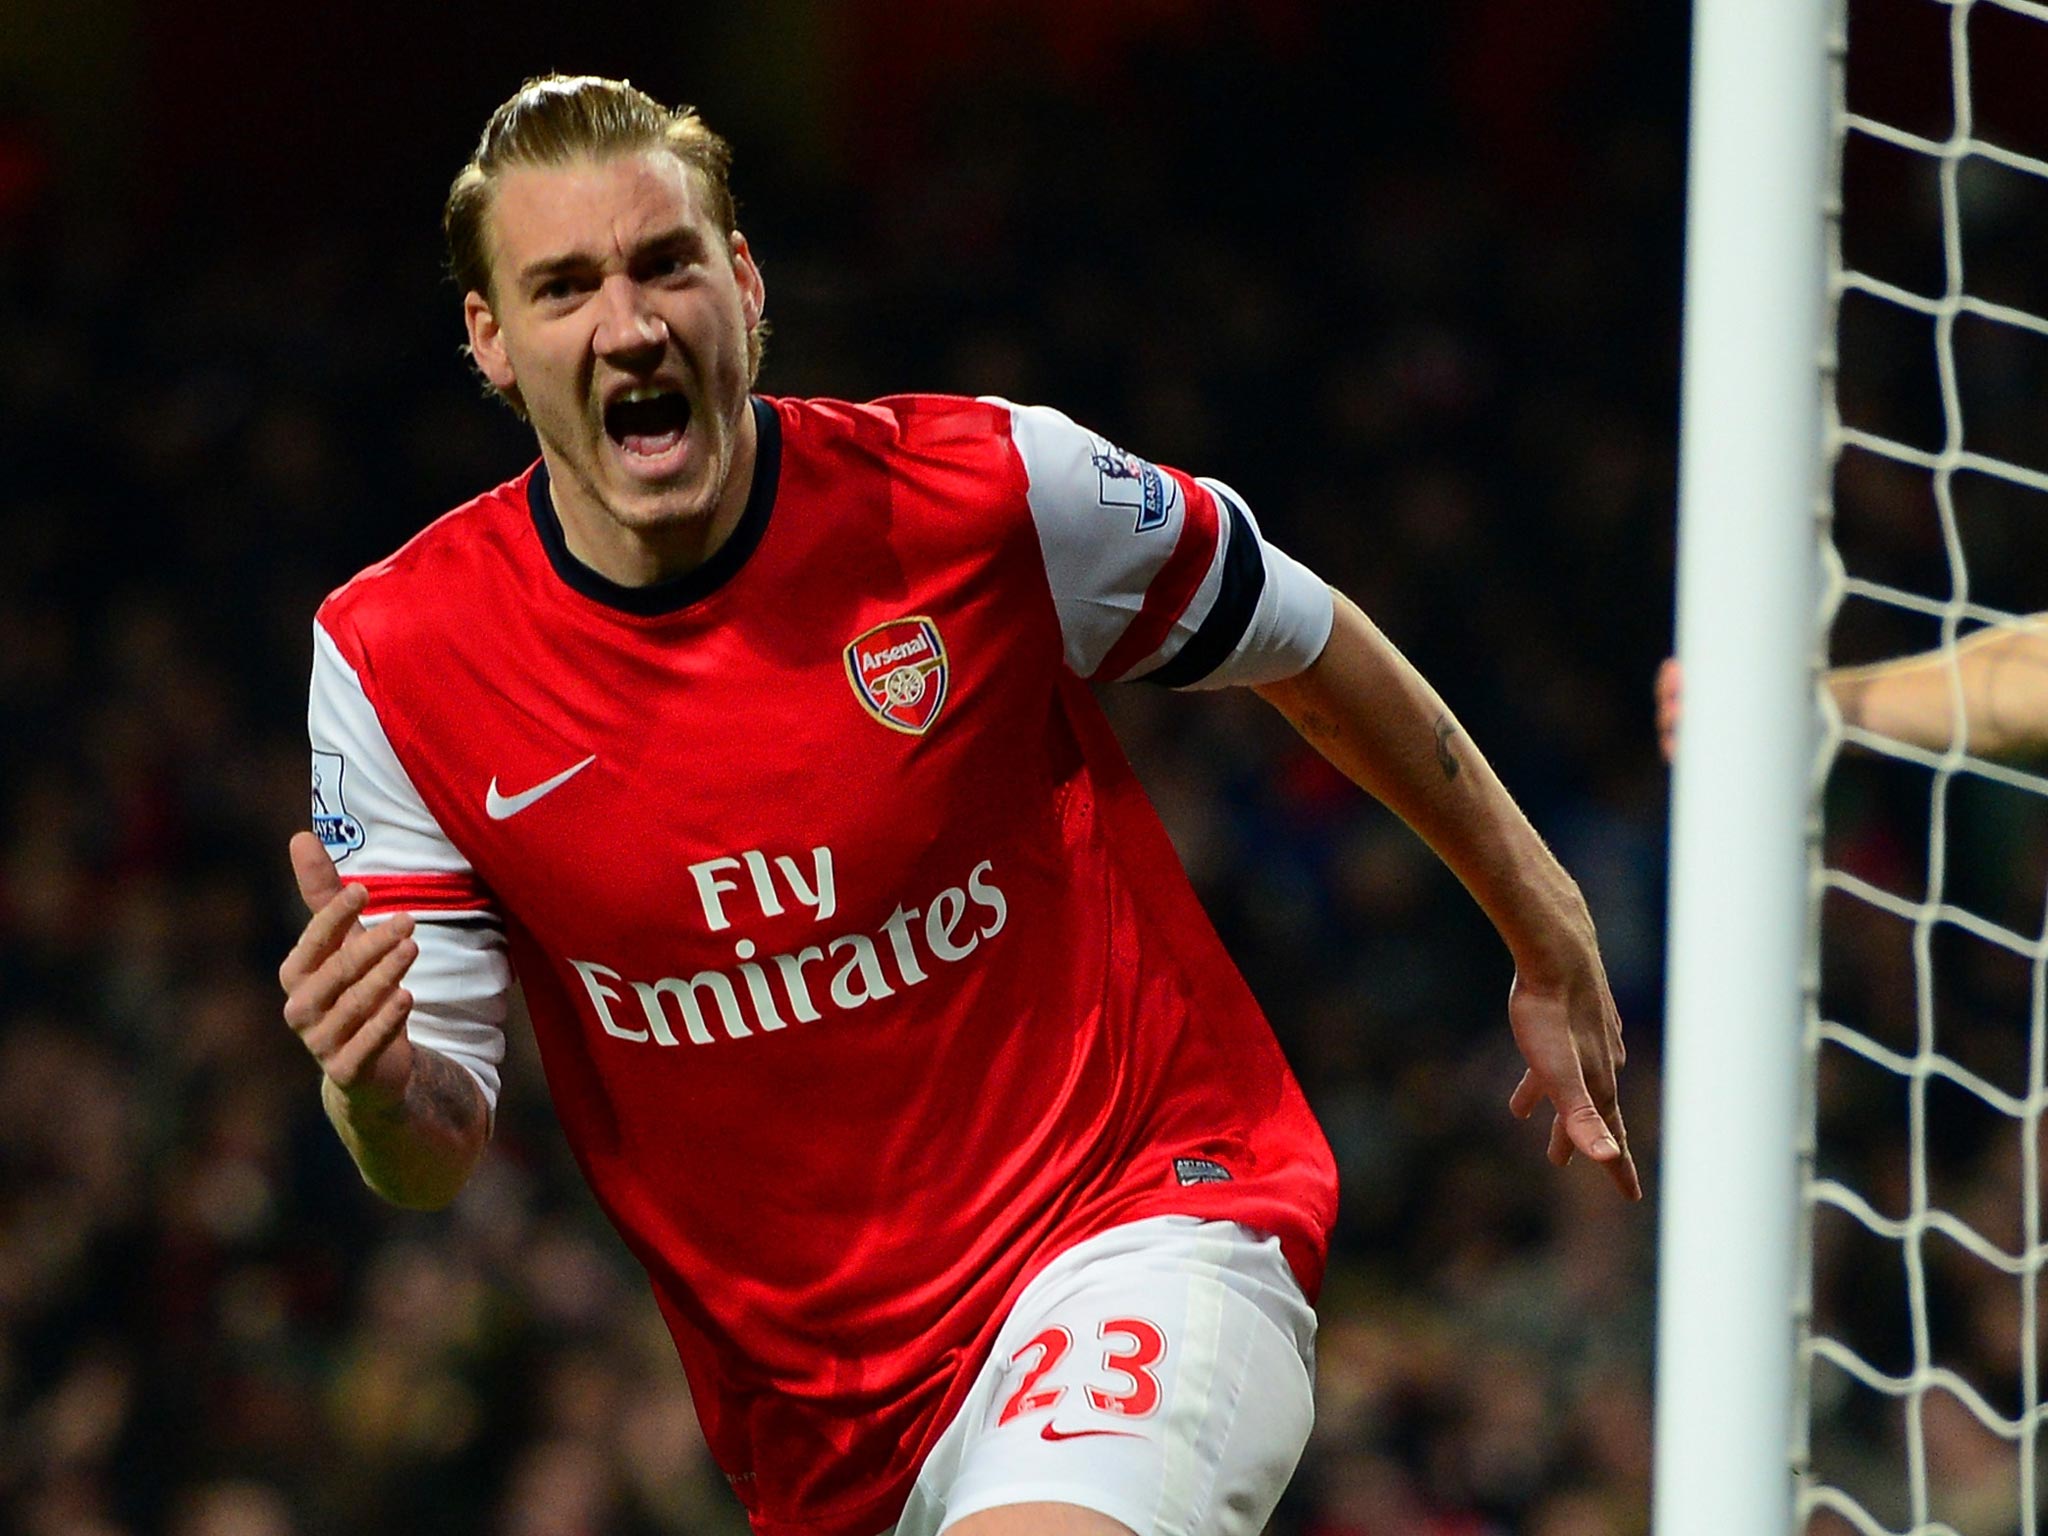 Nicklas Bendtner has admitted that he is unhappy with his lack of playing time at Arsenal having played just 82 minutes of Premier League football this season